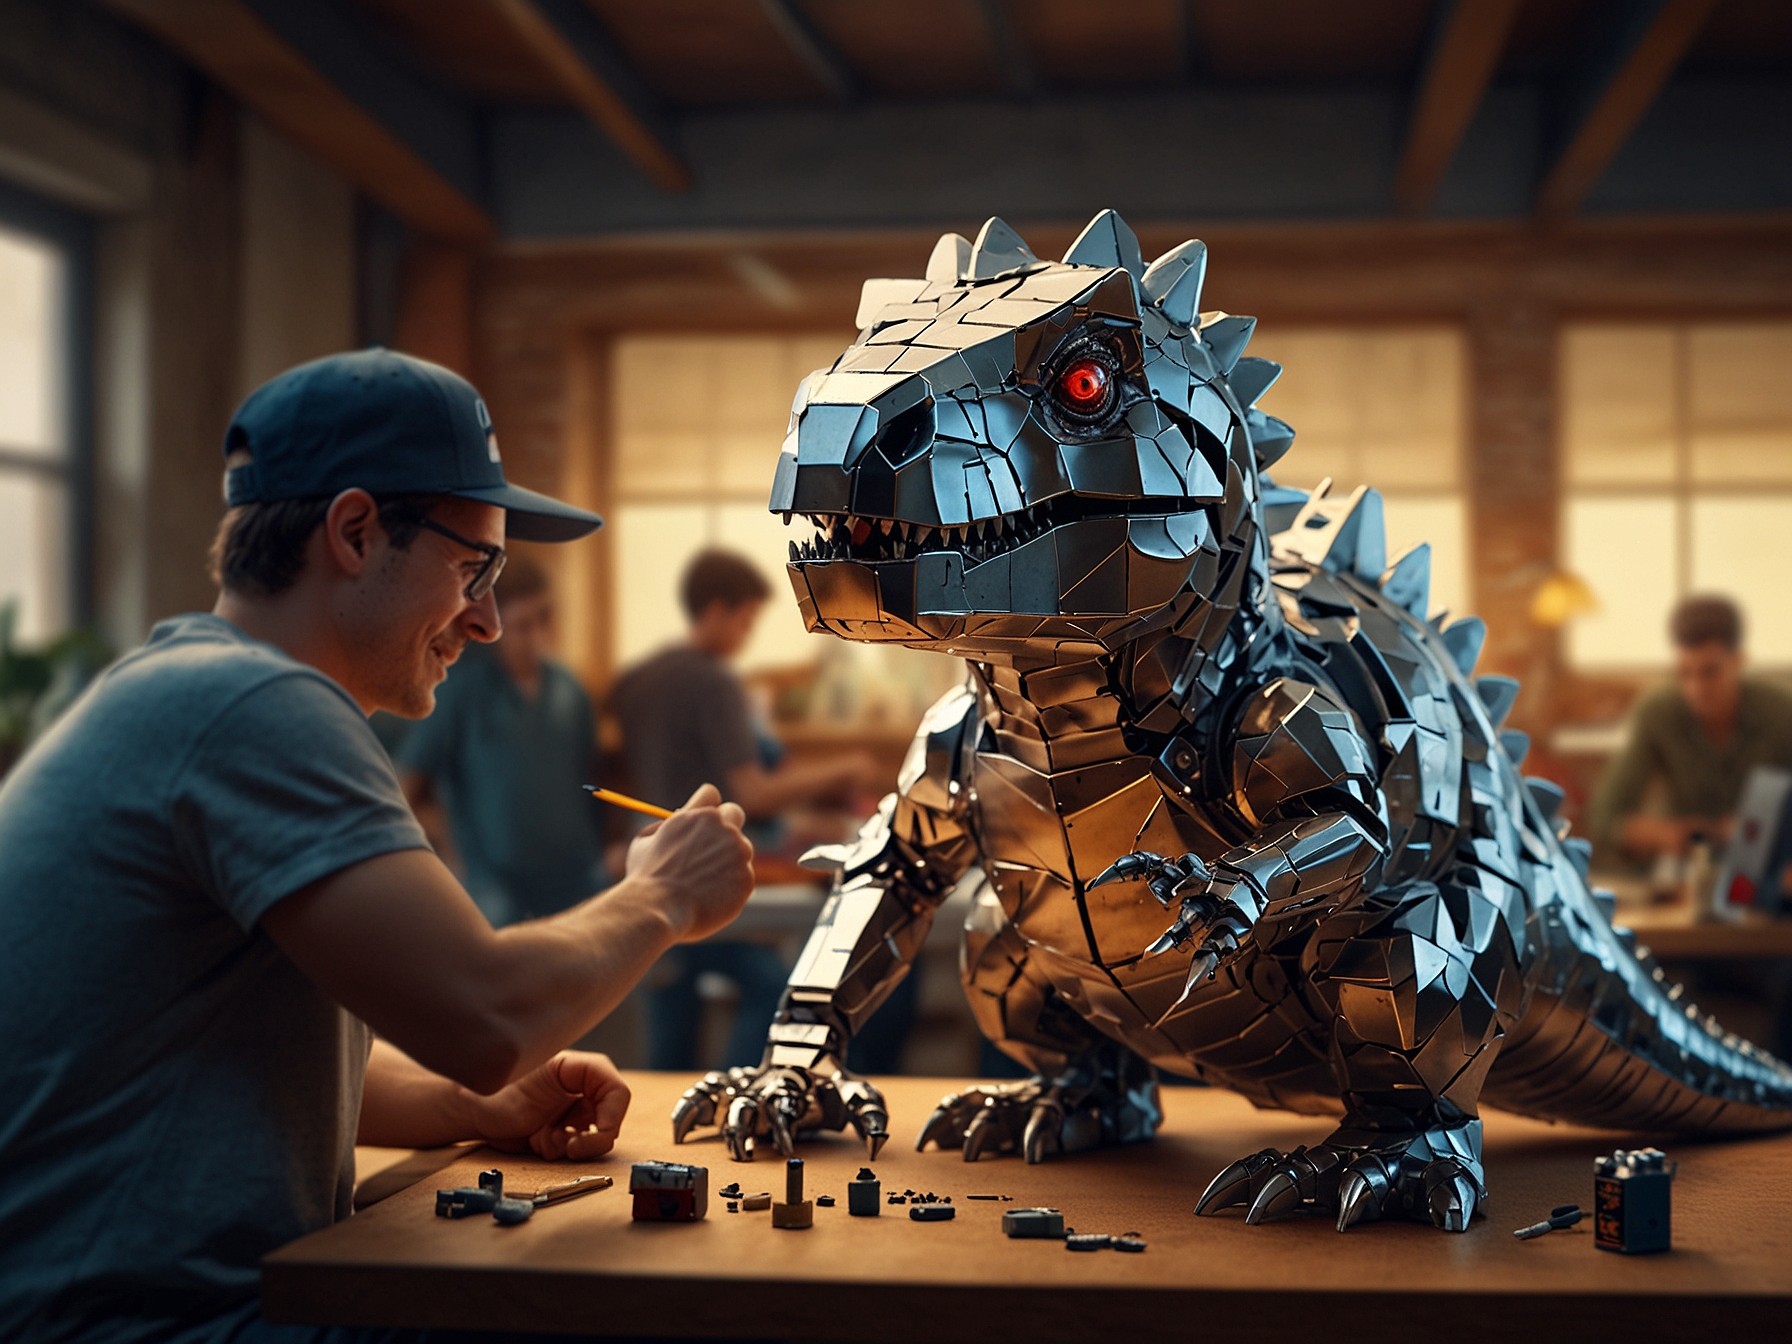 Young builders and nostalgic gamers assembling the Chrome Dino set, highlighting the easy-to-follow instructions and the fun, collaborative experience of recreating the iconic offline game character.